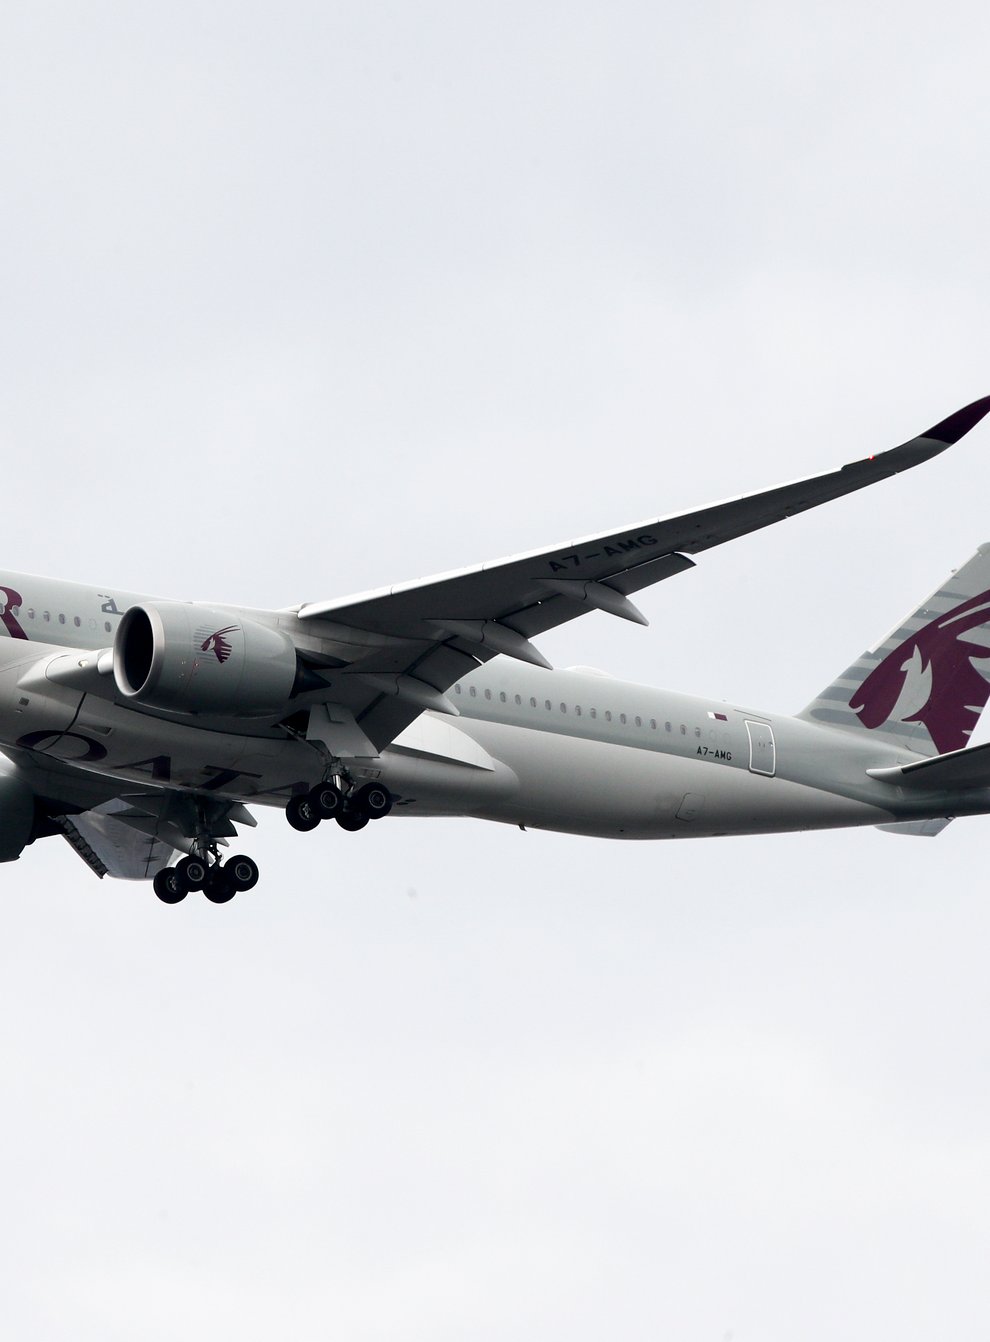 Qatar apologised after authorities forcibly examined female passengers from a Qatar Airways